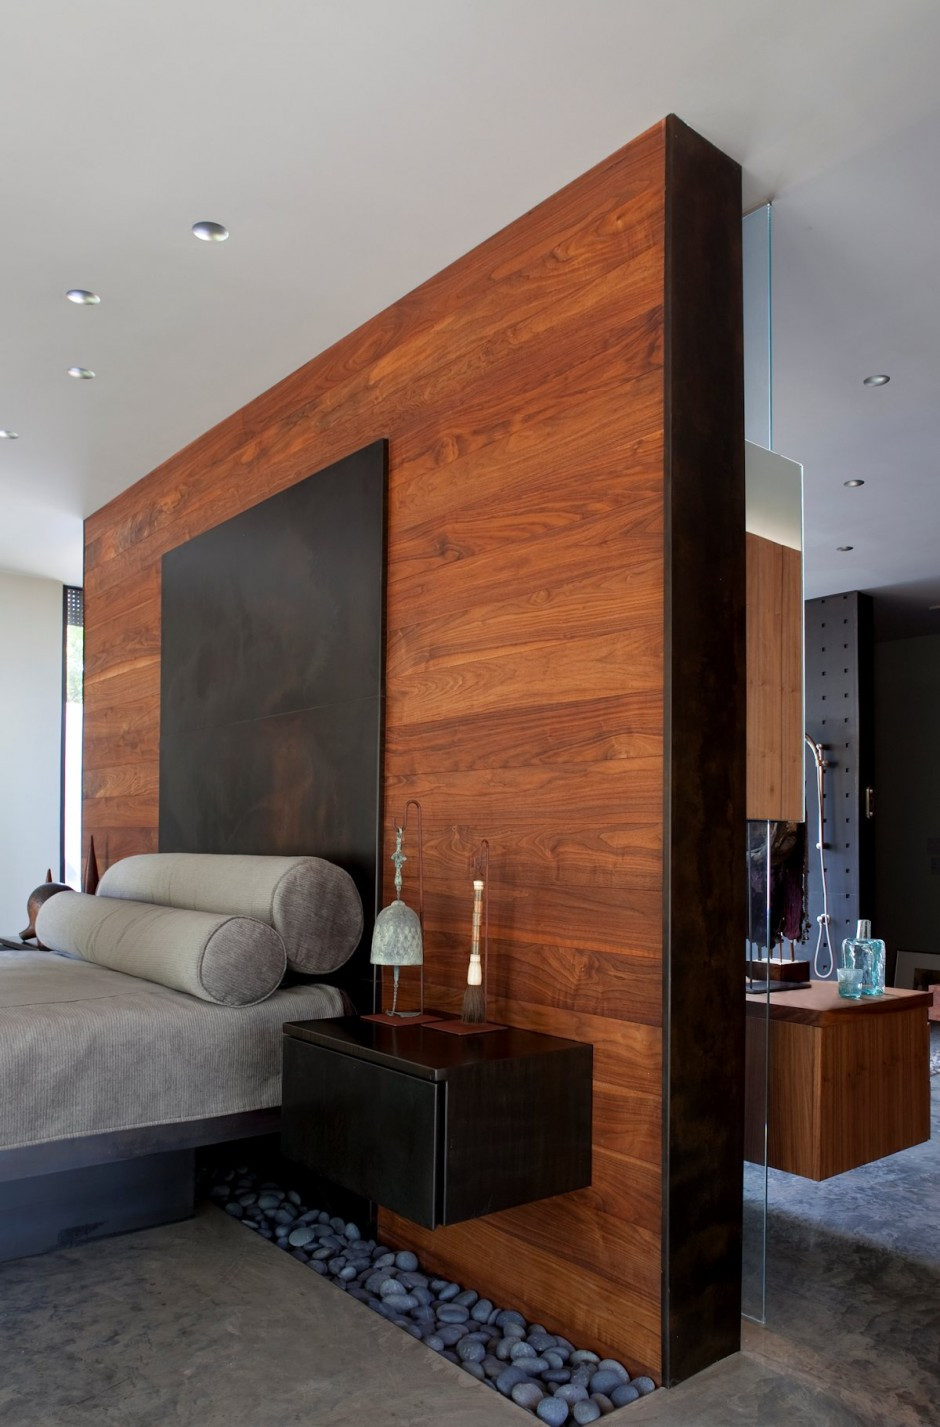 Wood Wall Bedroom
 52 Master Bedroom Ideas That Go Beyond The Basics